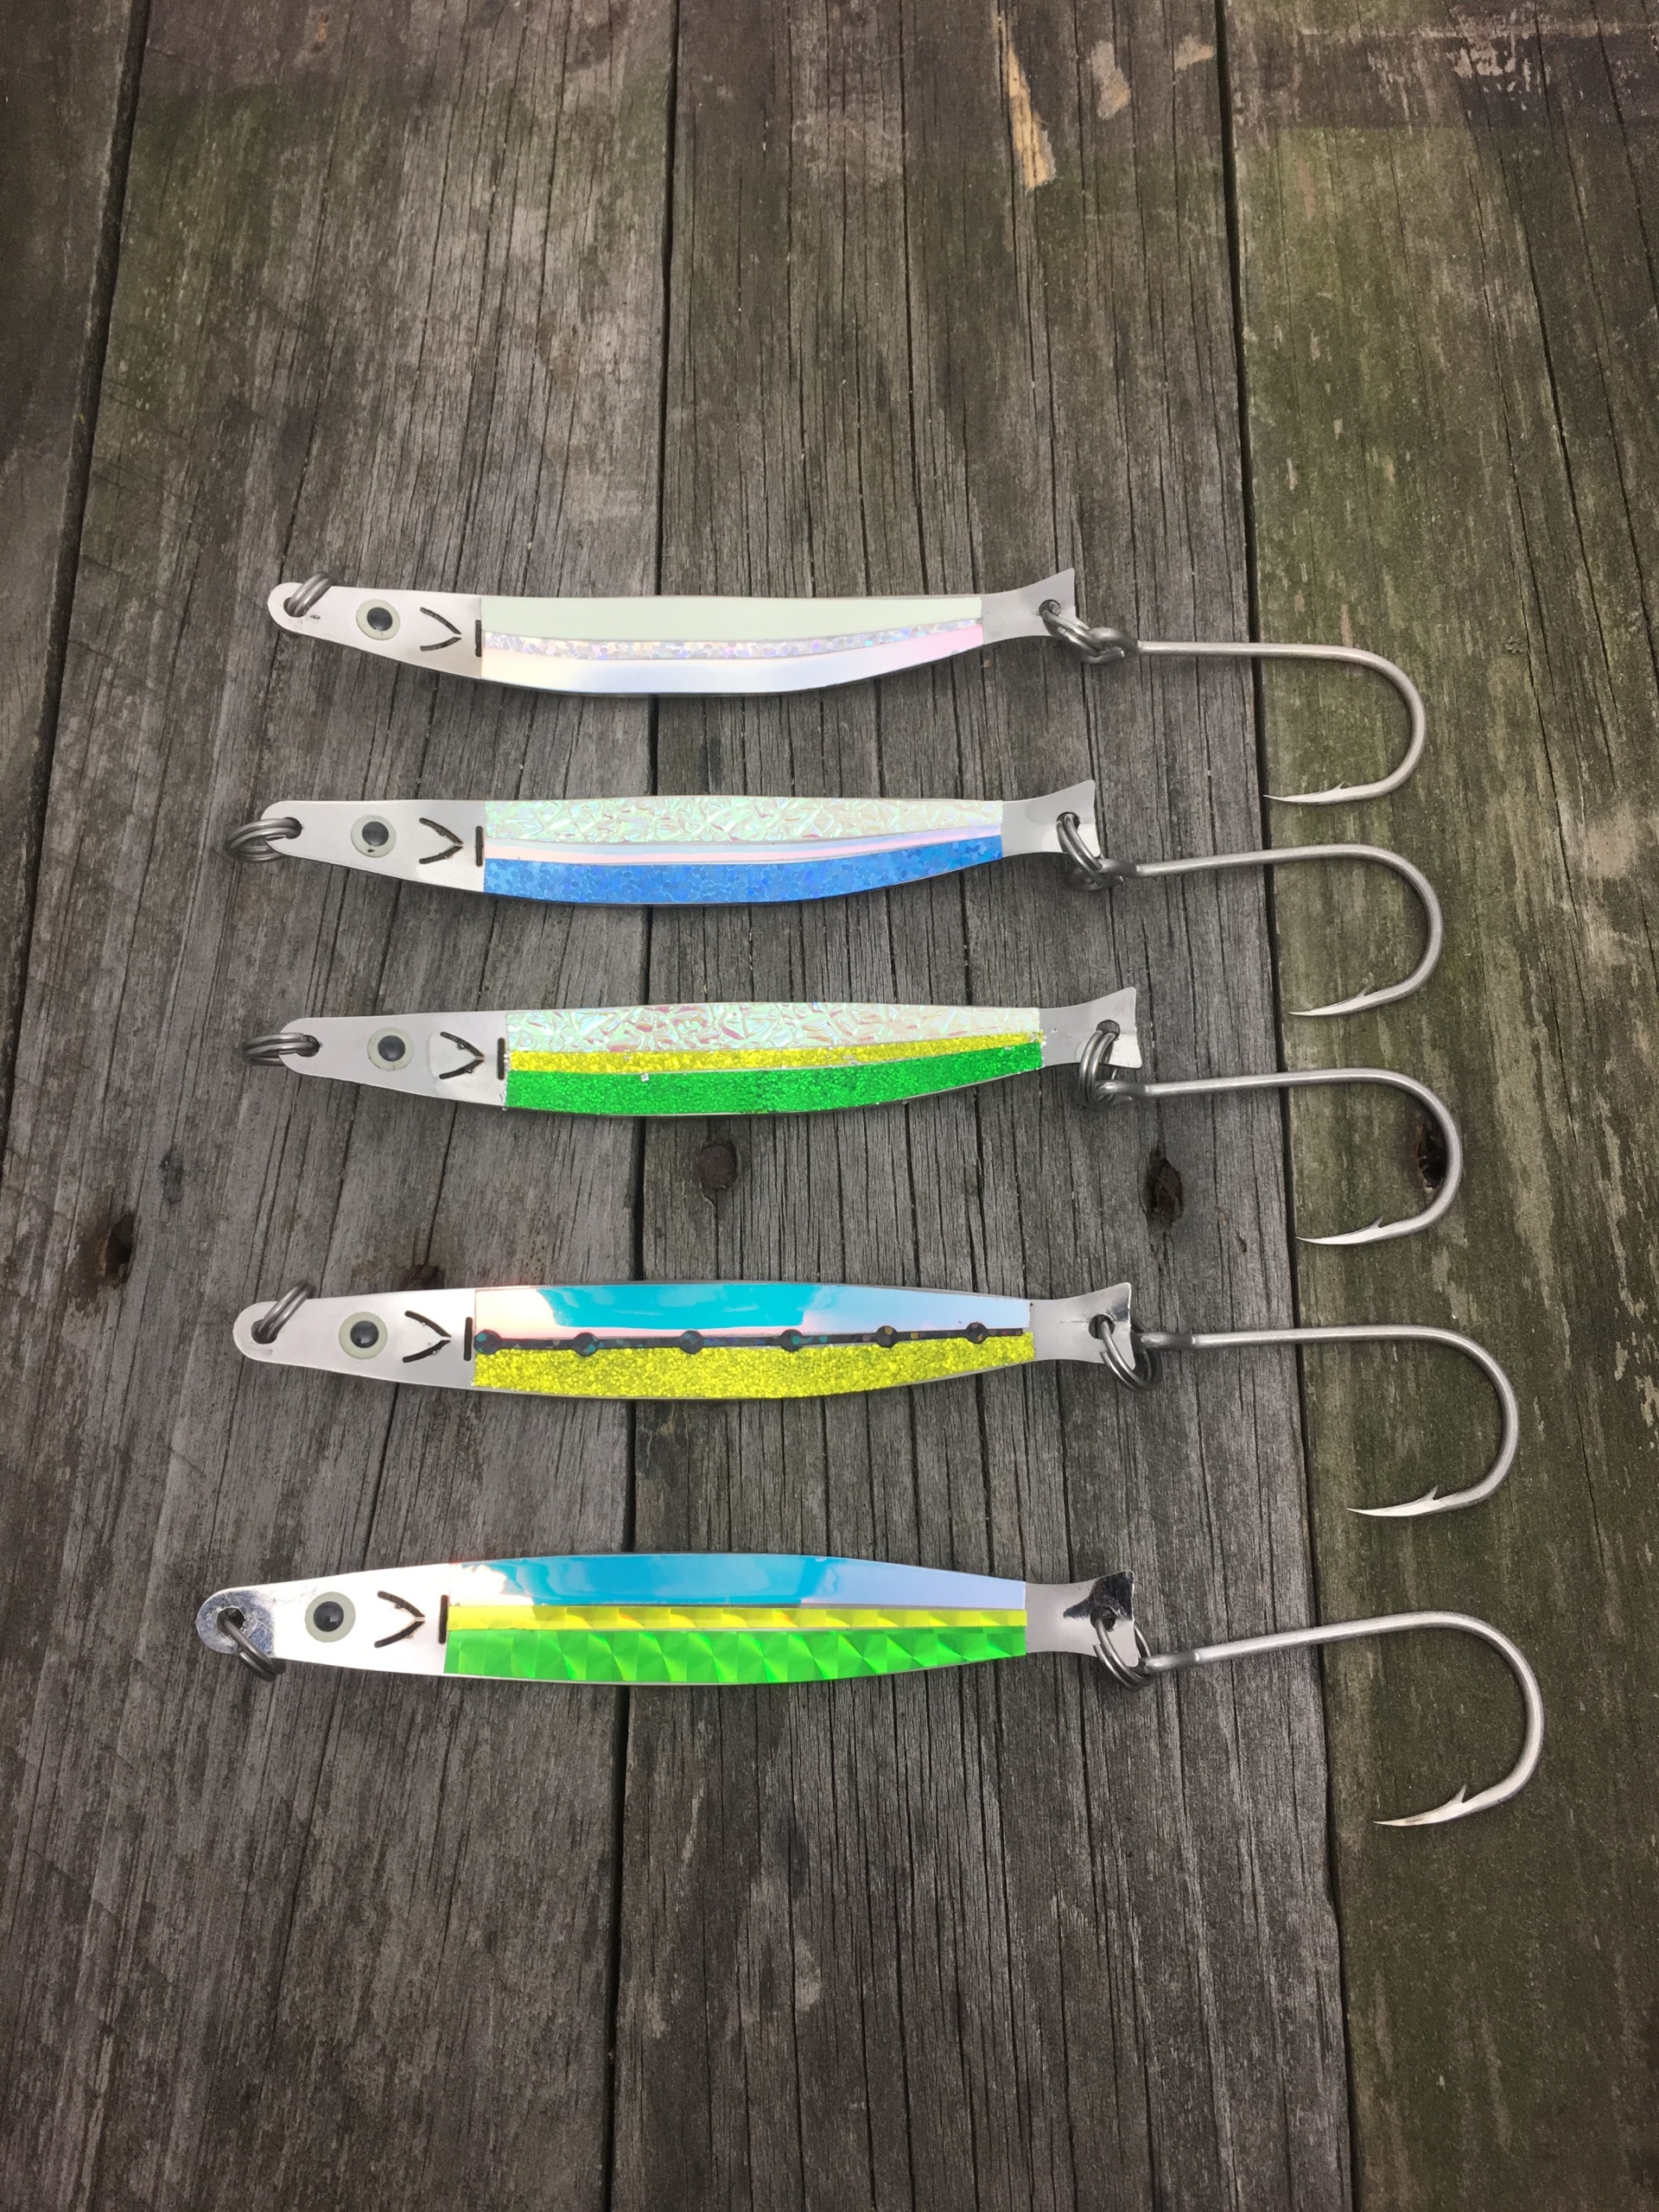 SP-1 The must have 5 pack of 4.5 needlefish lures